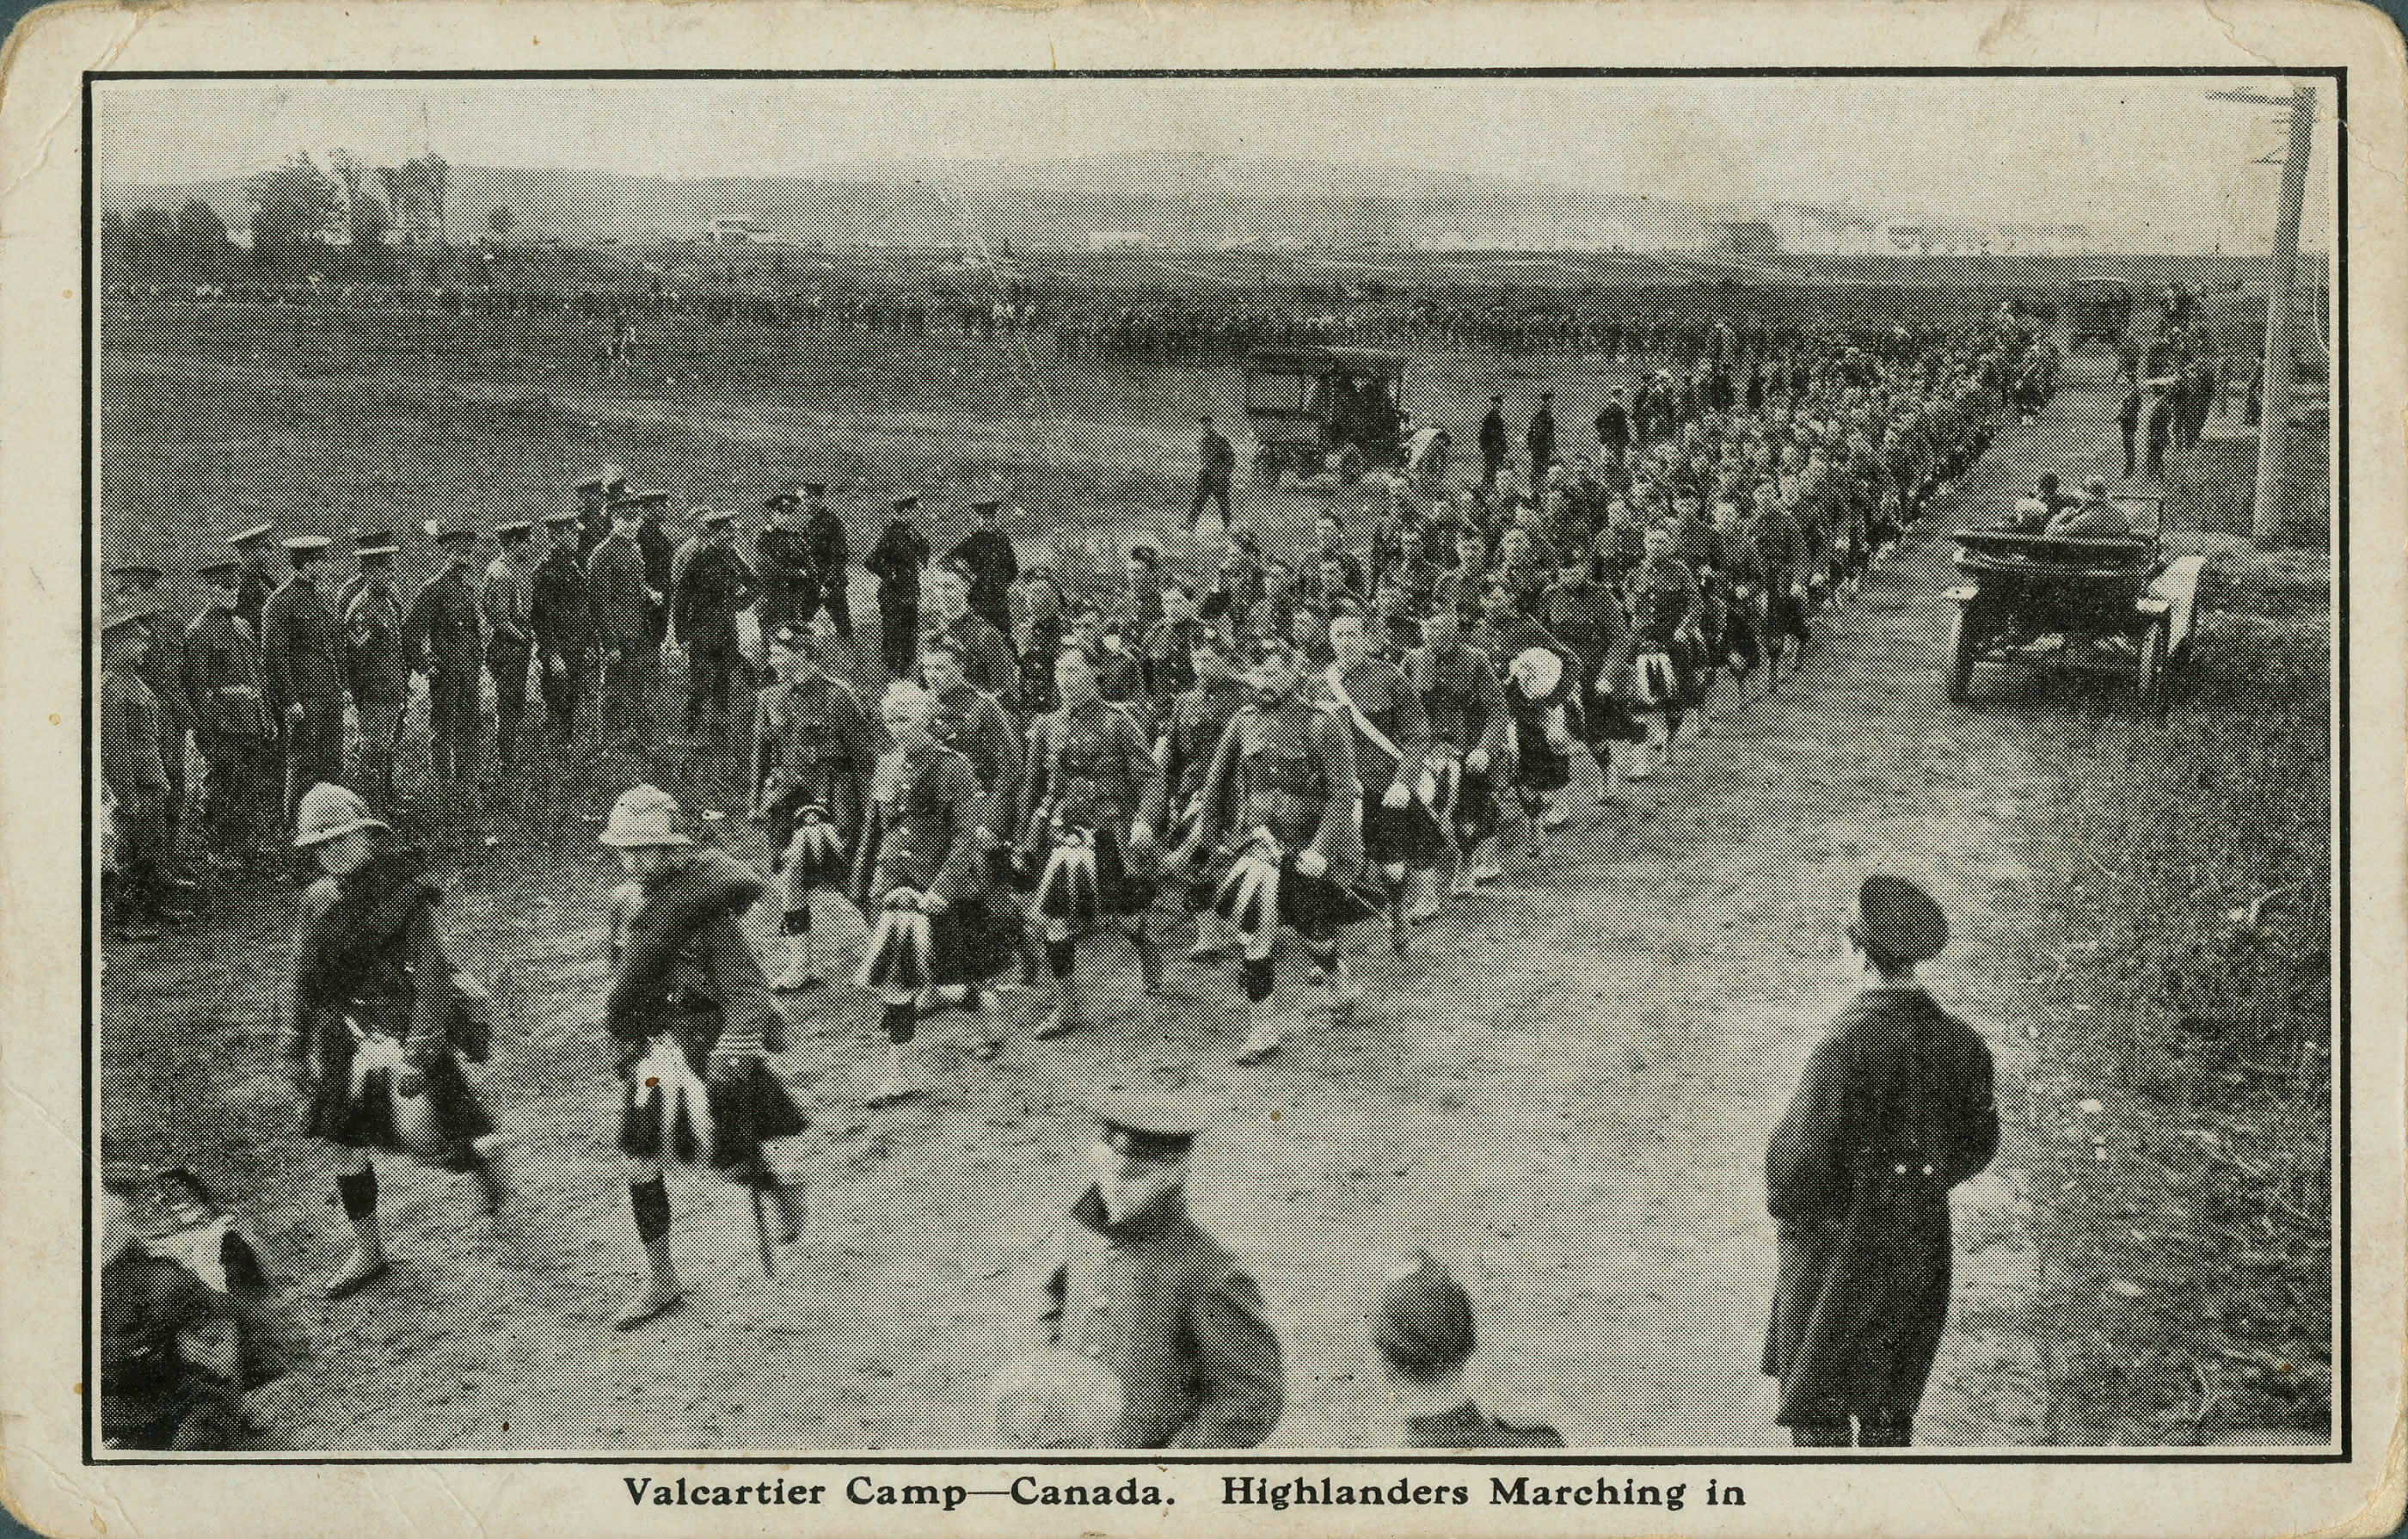 Highlanders Marching to Valcartier